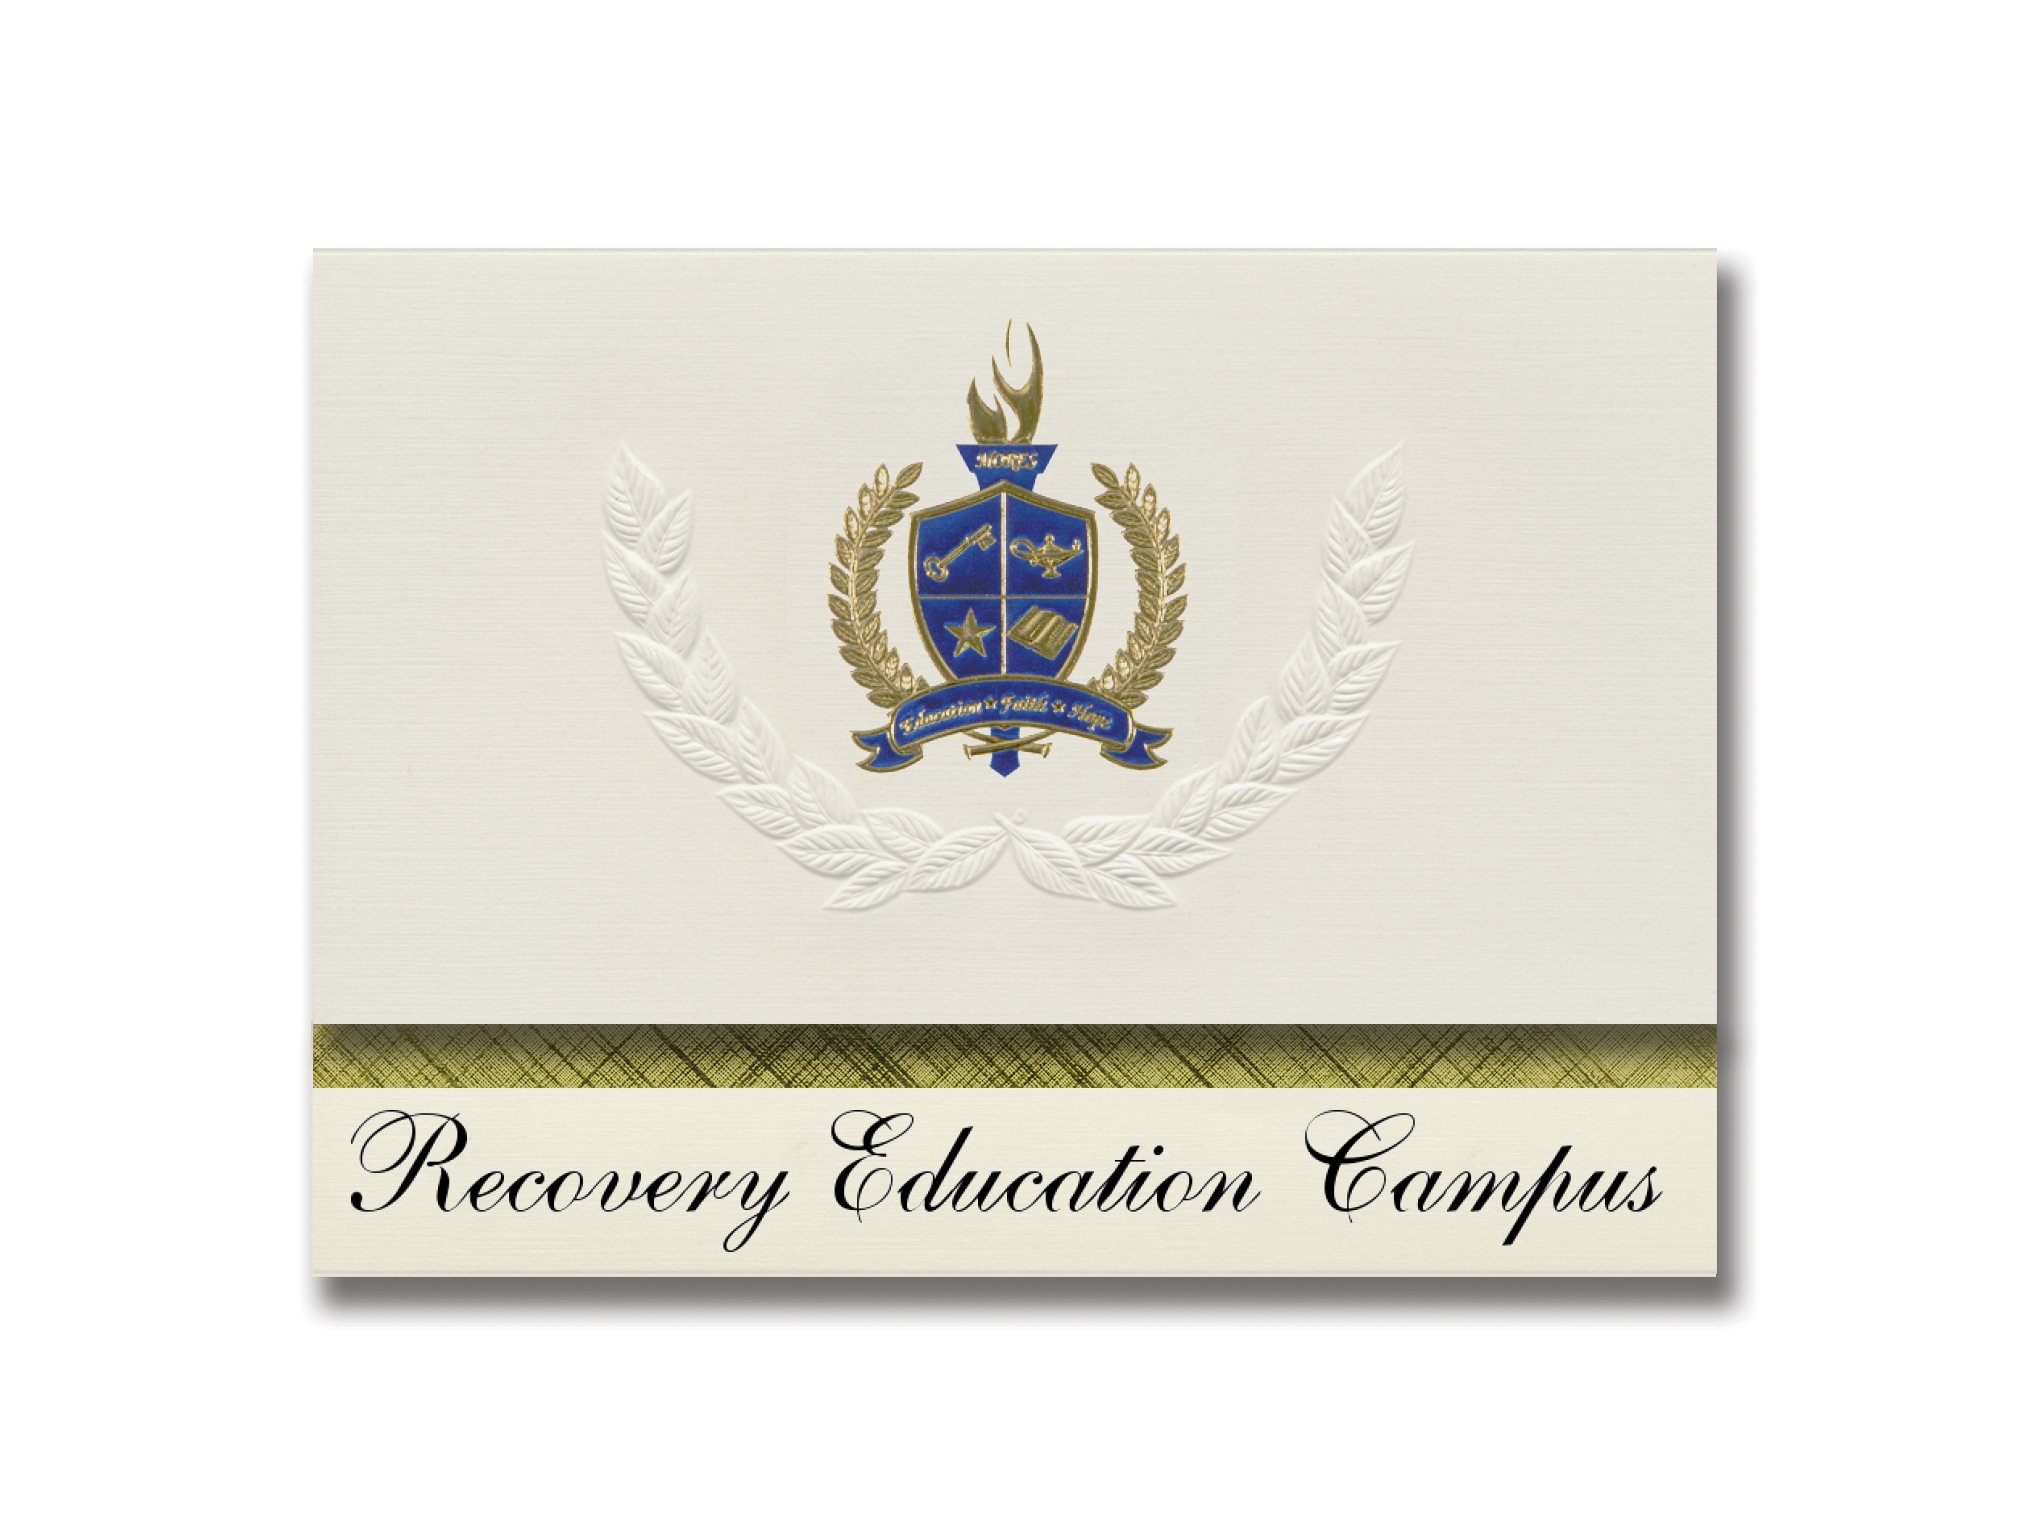 Signature Announcements Recovery Education Campus (Ralls, TX) Graduation Announcements, Presidential style, Elite package of 25 with Gold & Blue Me...